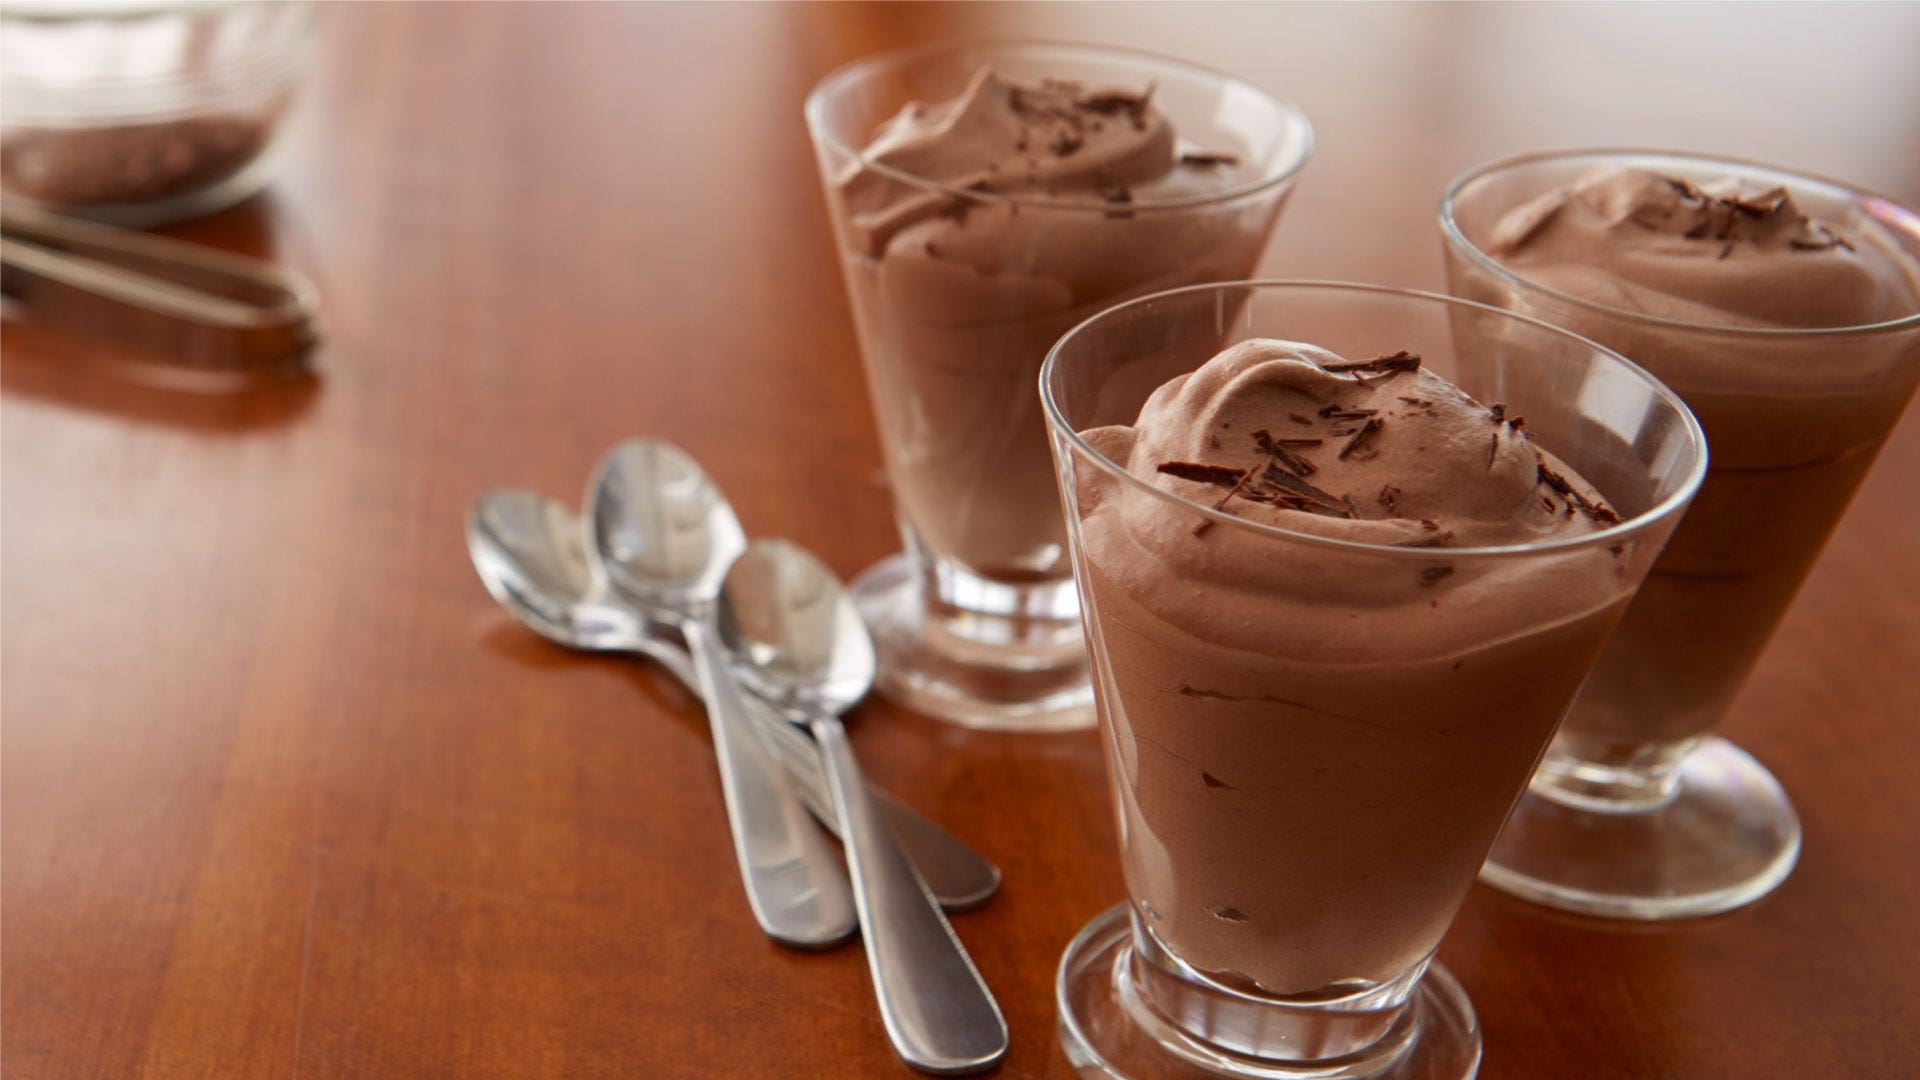 Easy Chocolate Mousse Recipe | HERSHEY'S